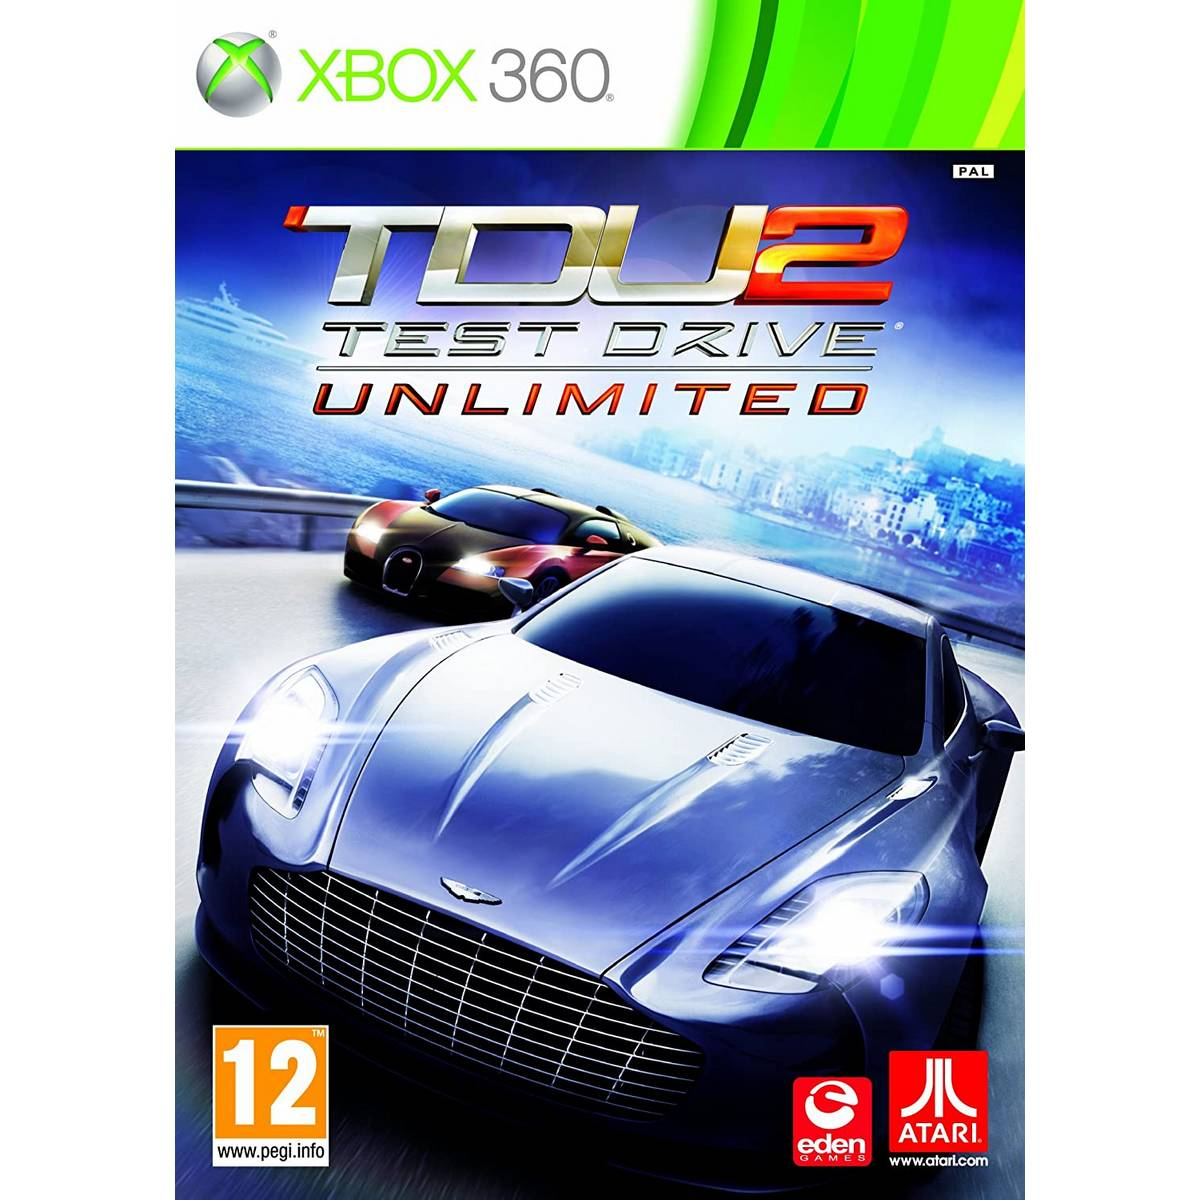 image 47 - Xbox 360 Games Download - TEST DRIVE